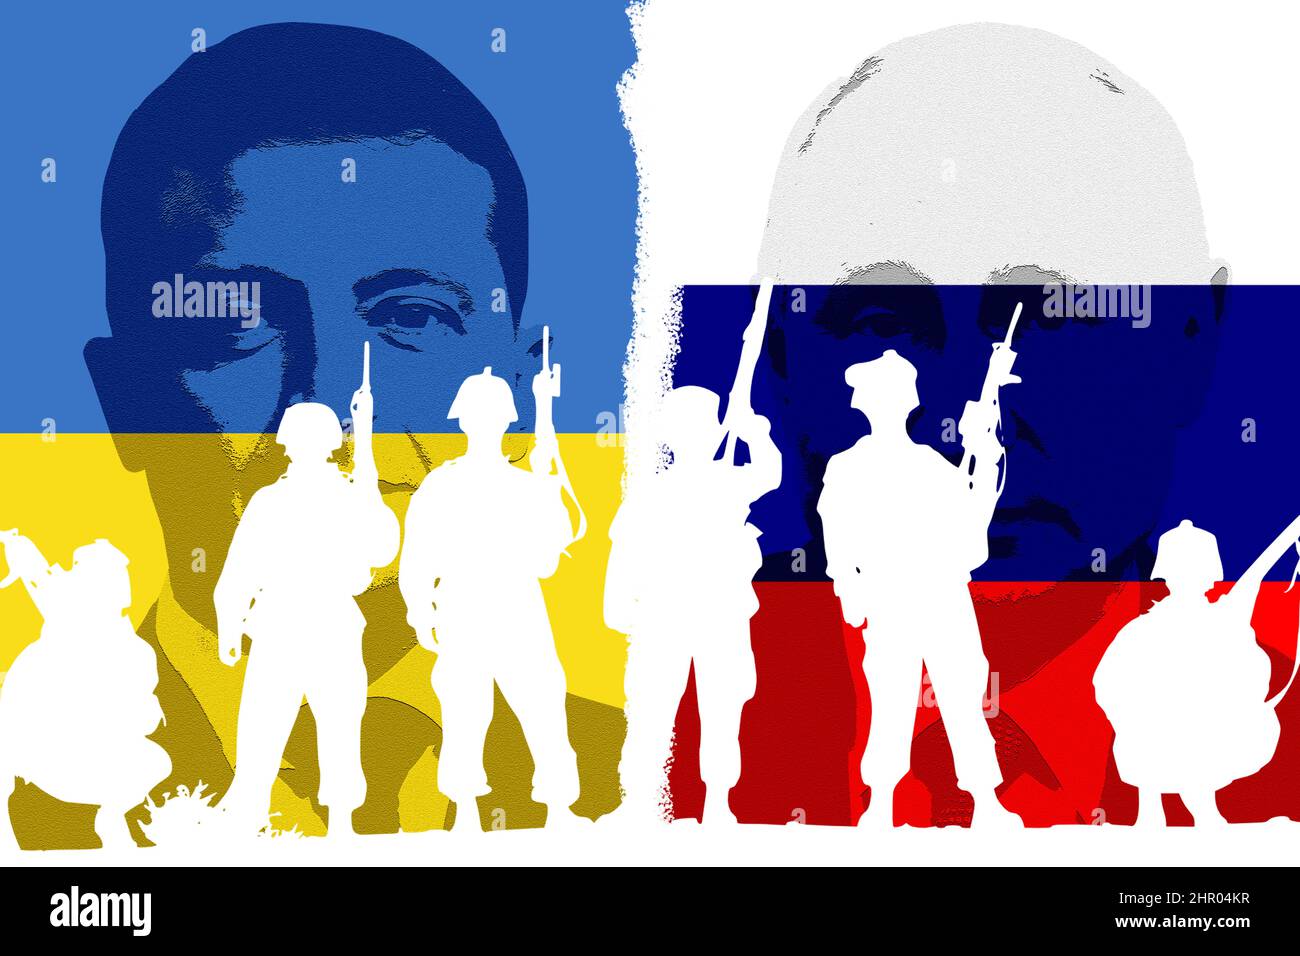 Ukrainian and Russian flags, faces of presidents Volodymyr Zelensky and Vladimir Putin and silhouettes of soldiers Stock Photo